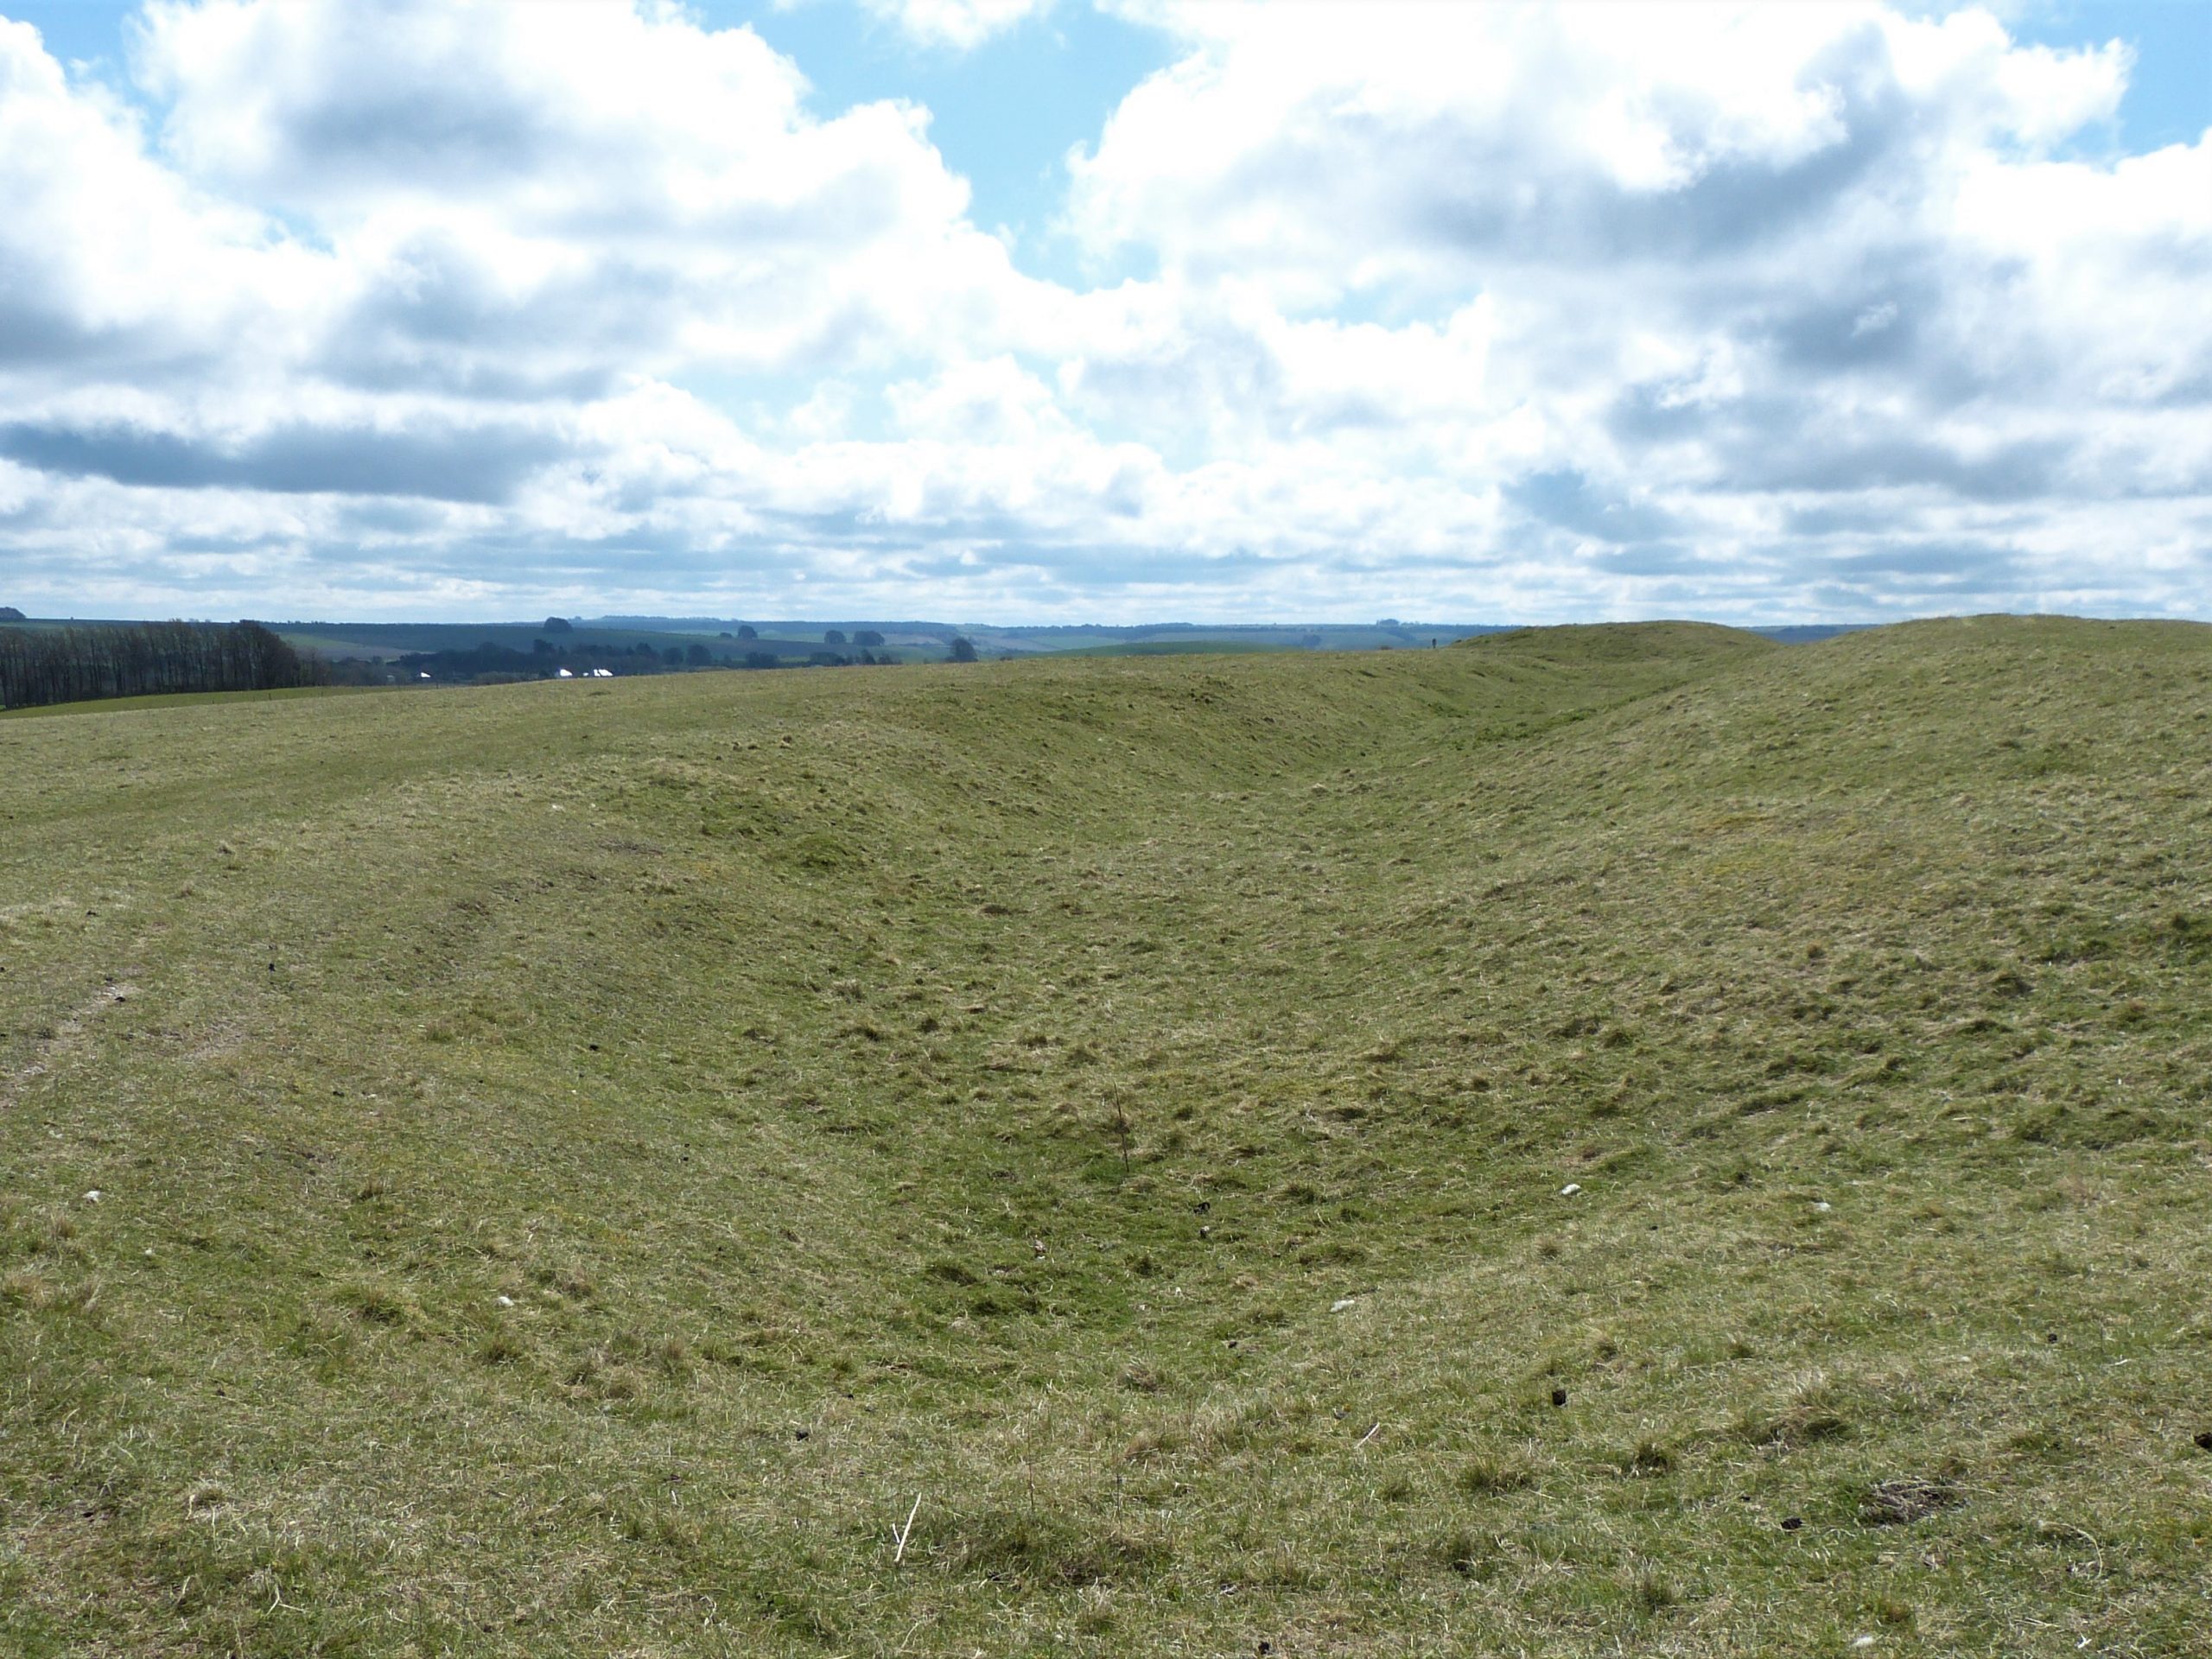 Part of the outer ditch of the Windmill Hill Causewayed Enclosure